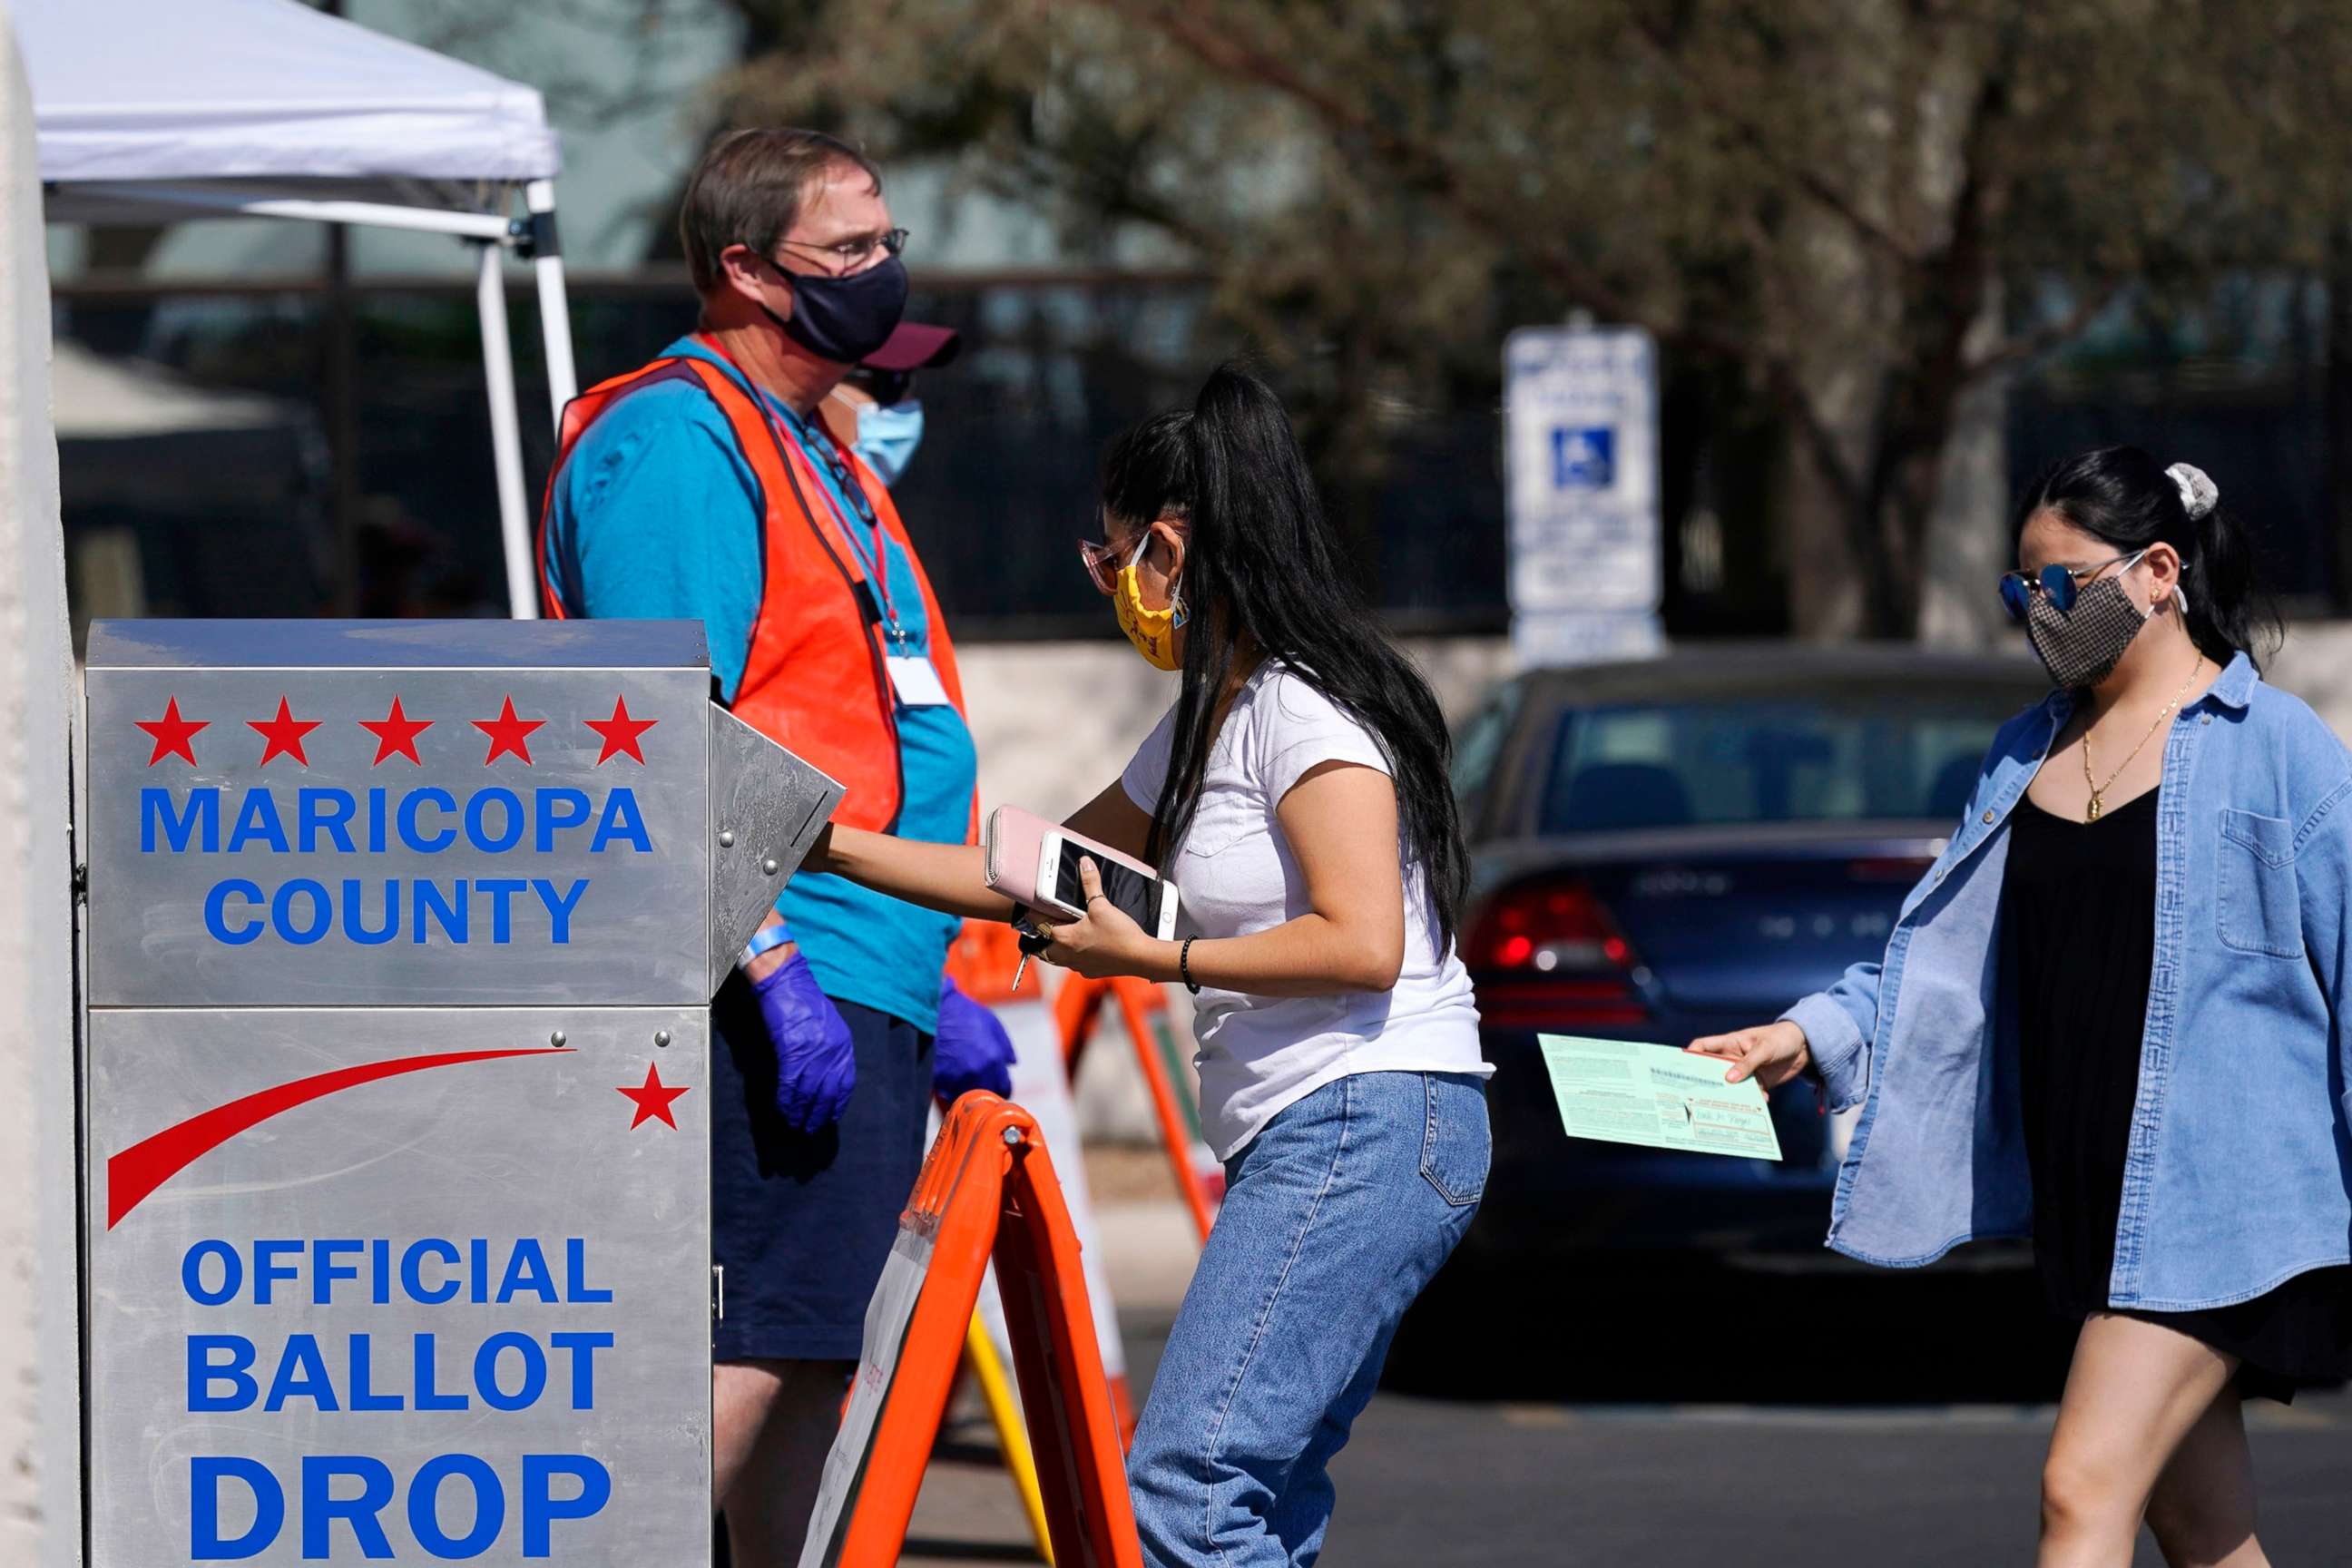 PHOTO: In this Oct. 20, 2020, file photo, voters drop off ballots as volunteers look on at the Maricopa County Recorder's Office in Phoenix.